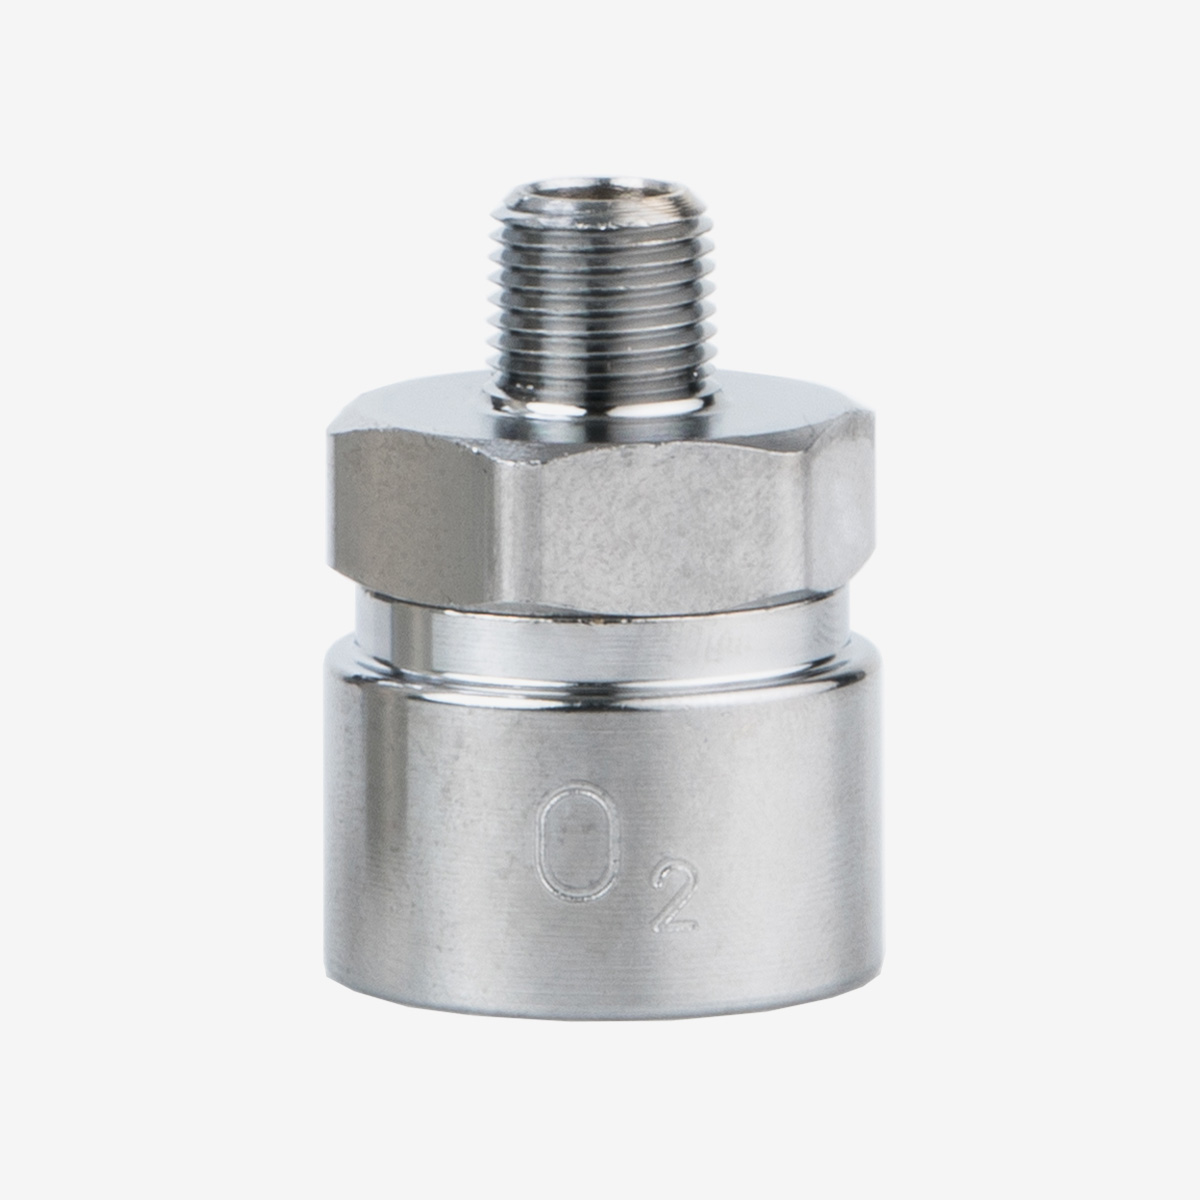 1/8th inch Adapter NPT Male O2 AUST on white background